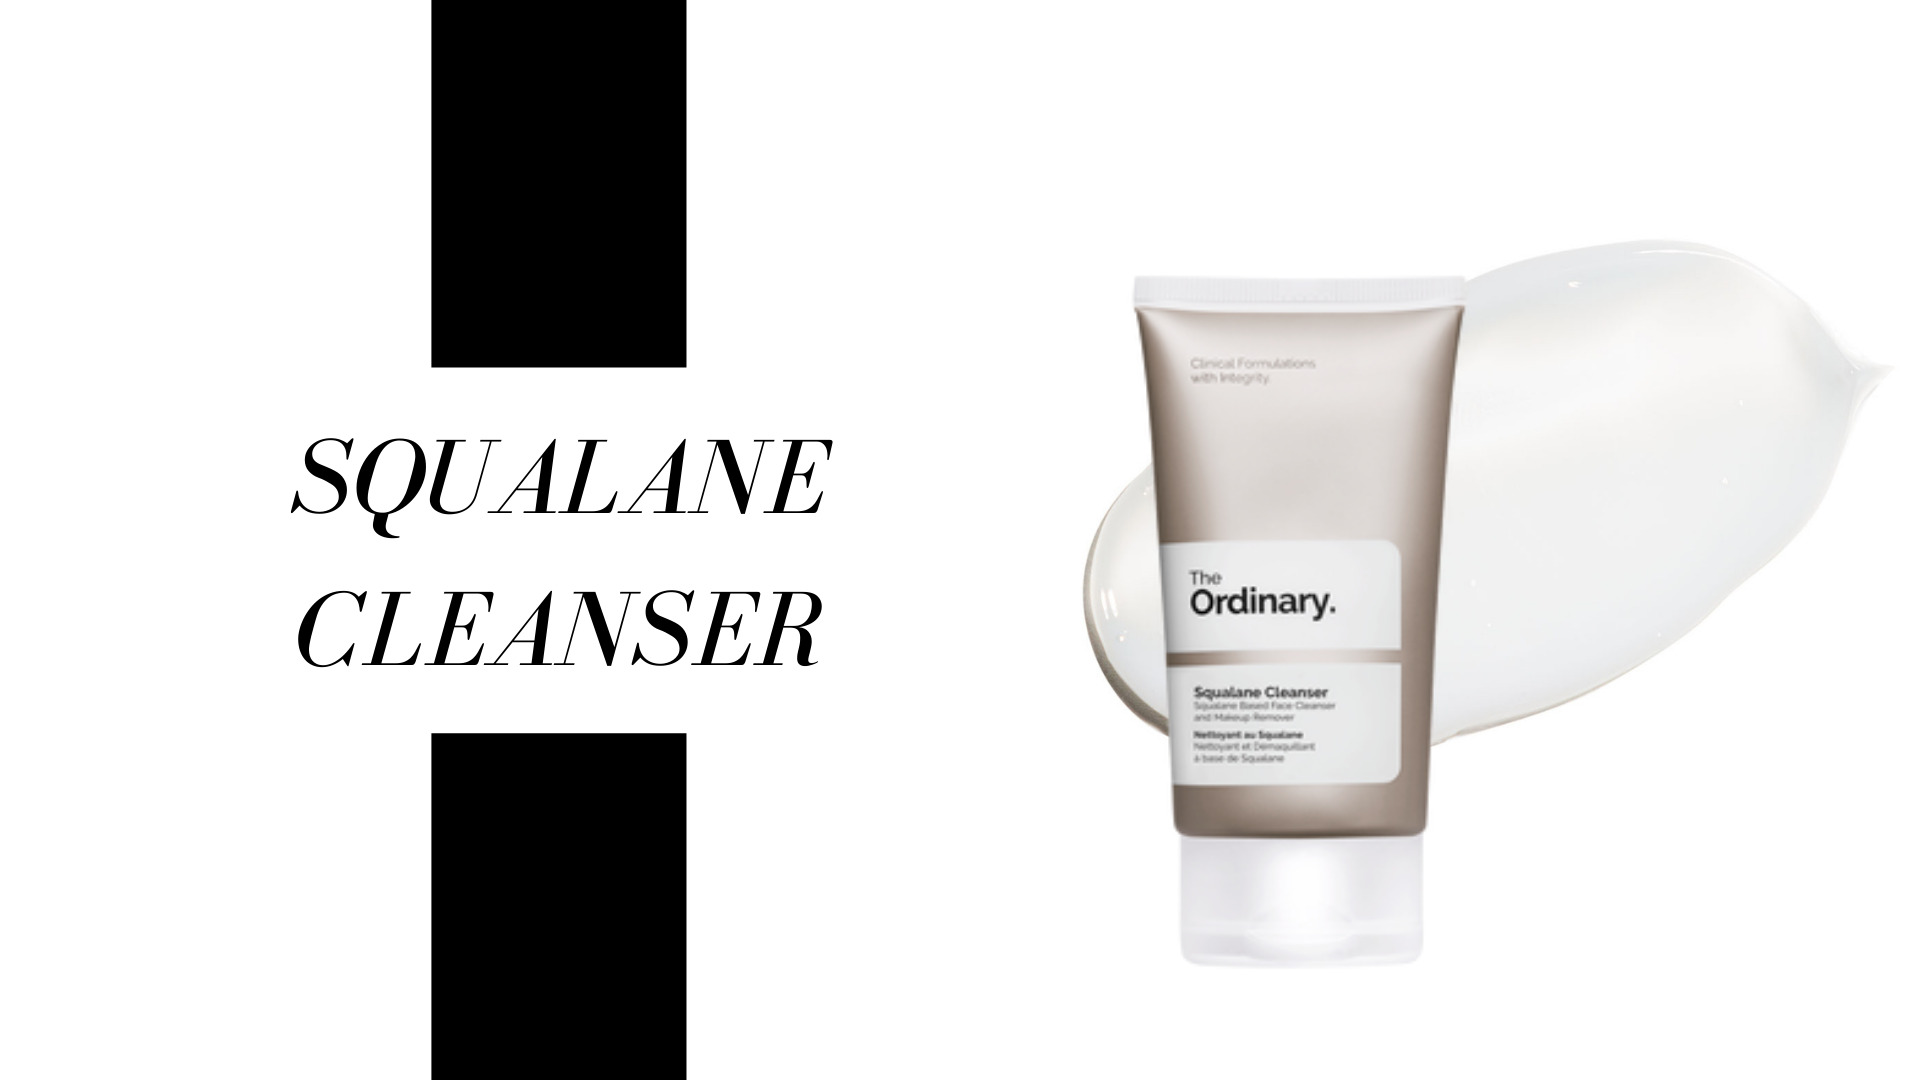 This product is one of the most gentle and moisturizing cleansers that I've ever tried! This cleanser's formula has Squalane, which, alongside other lipophilic esters, makes this solution very moisturizing and efficient in dissolving makeup and facial impurities. It is a very easy product to work with.